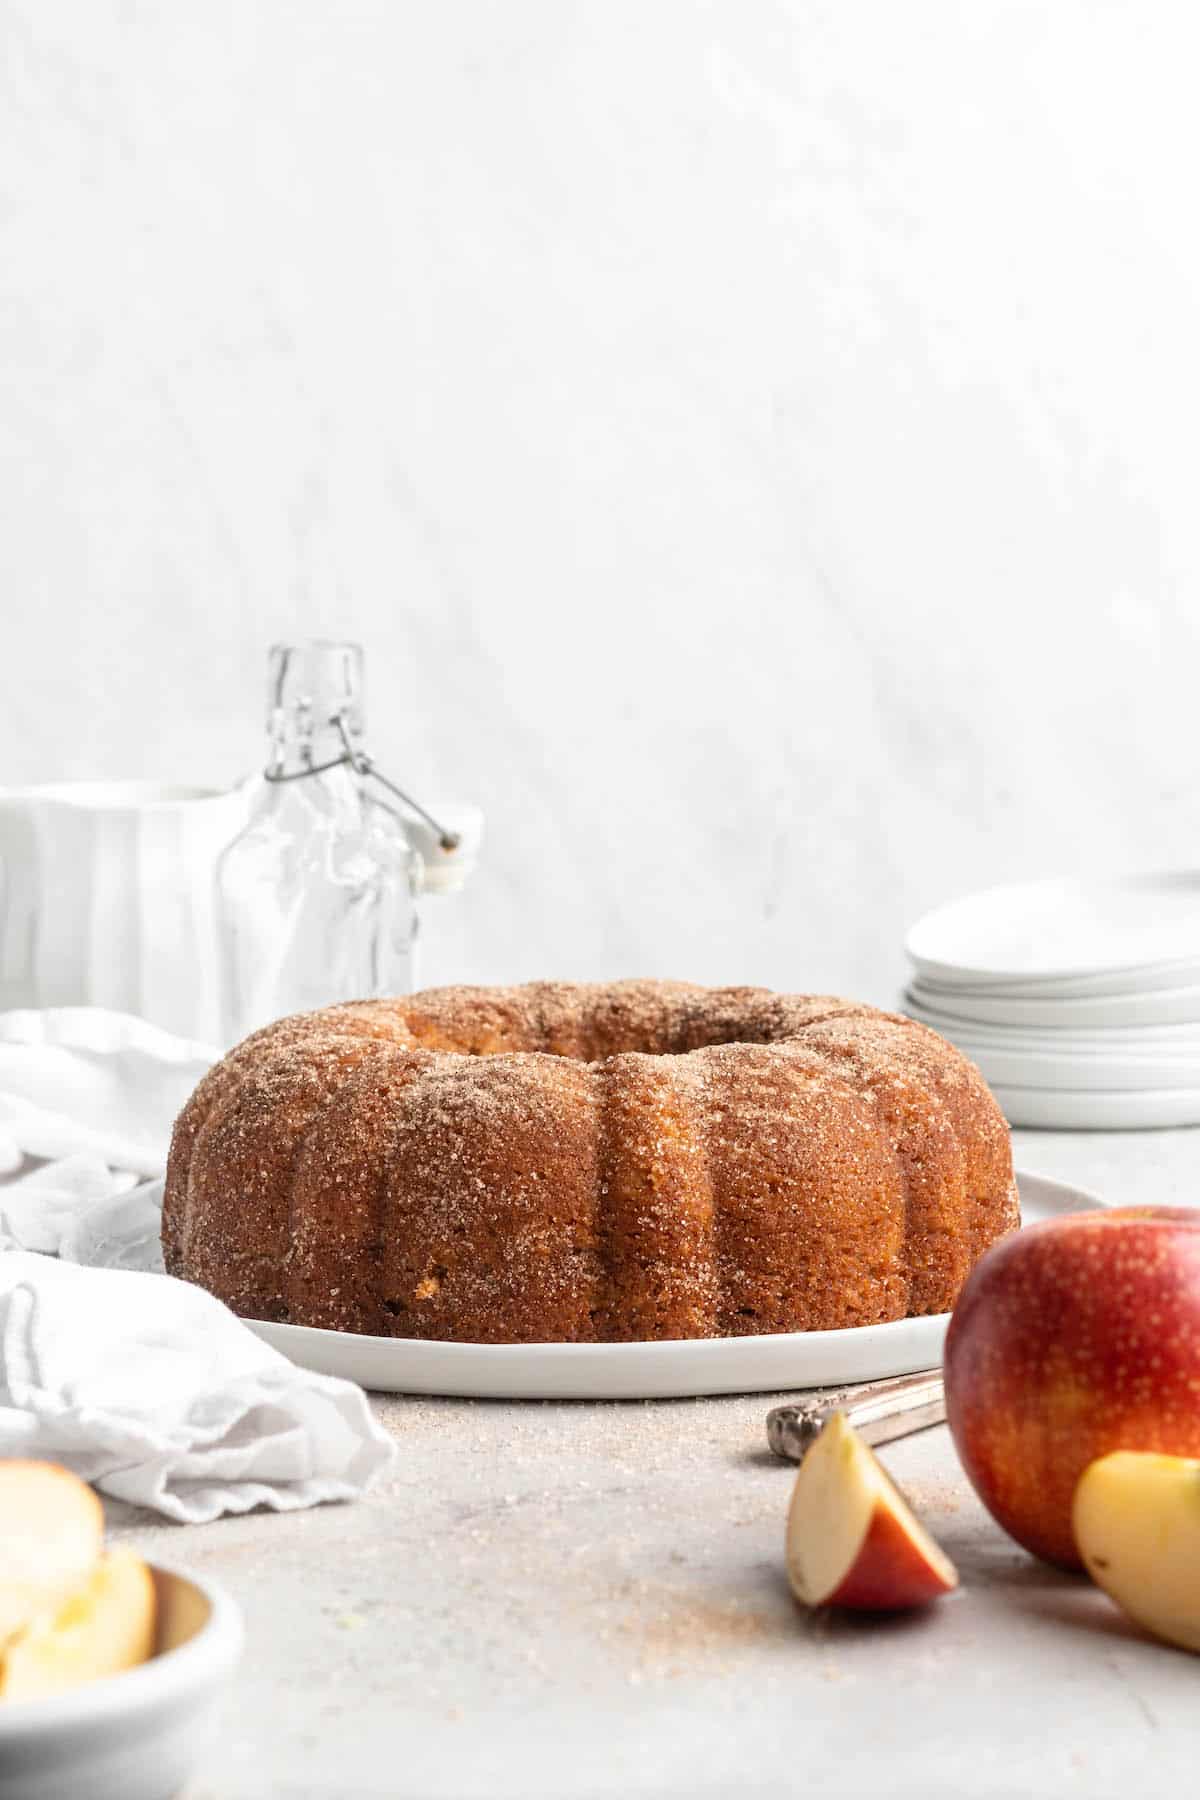 An apple cider donut cake on a white plate against a white background with a whole apple